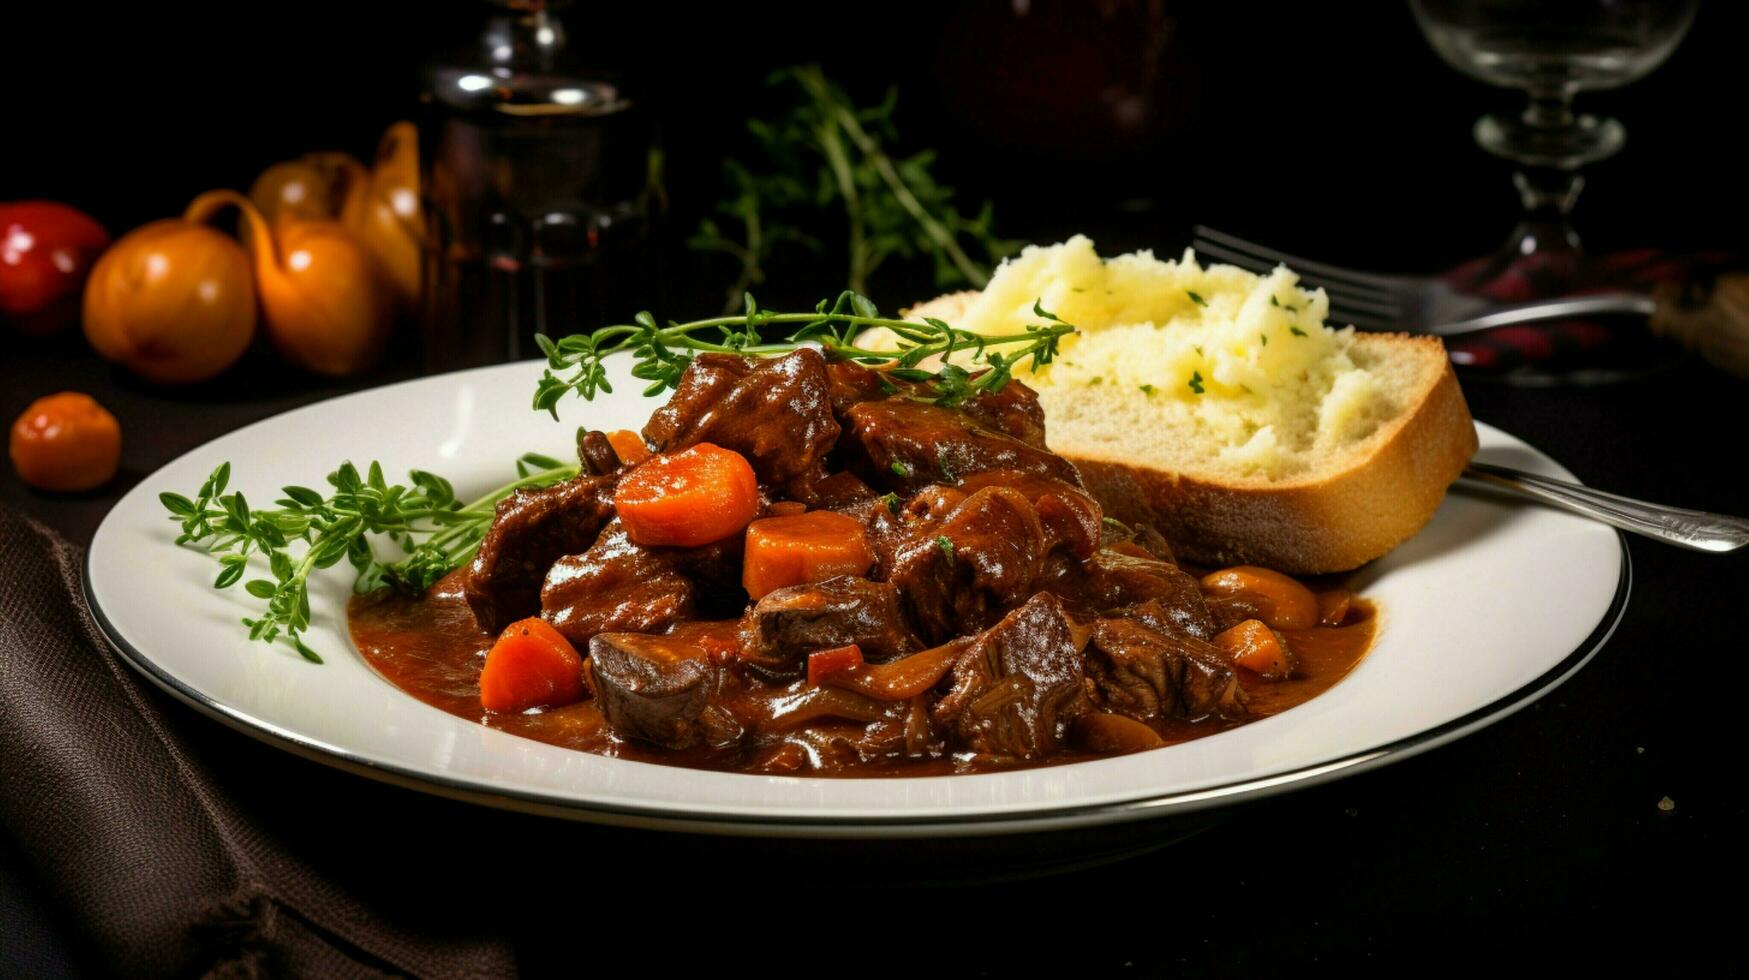 freshly cooked gourmet meal braised beef stew with savory photo